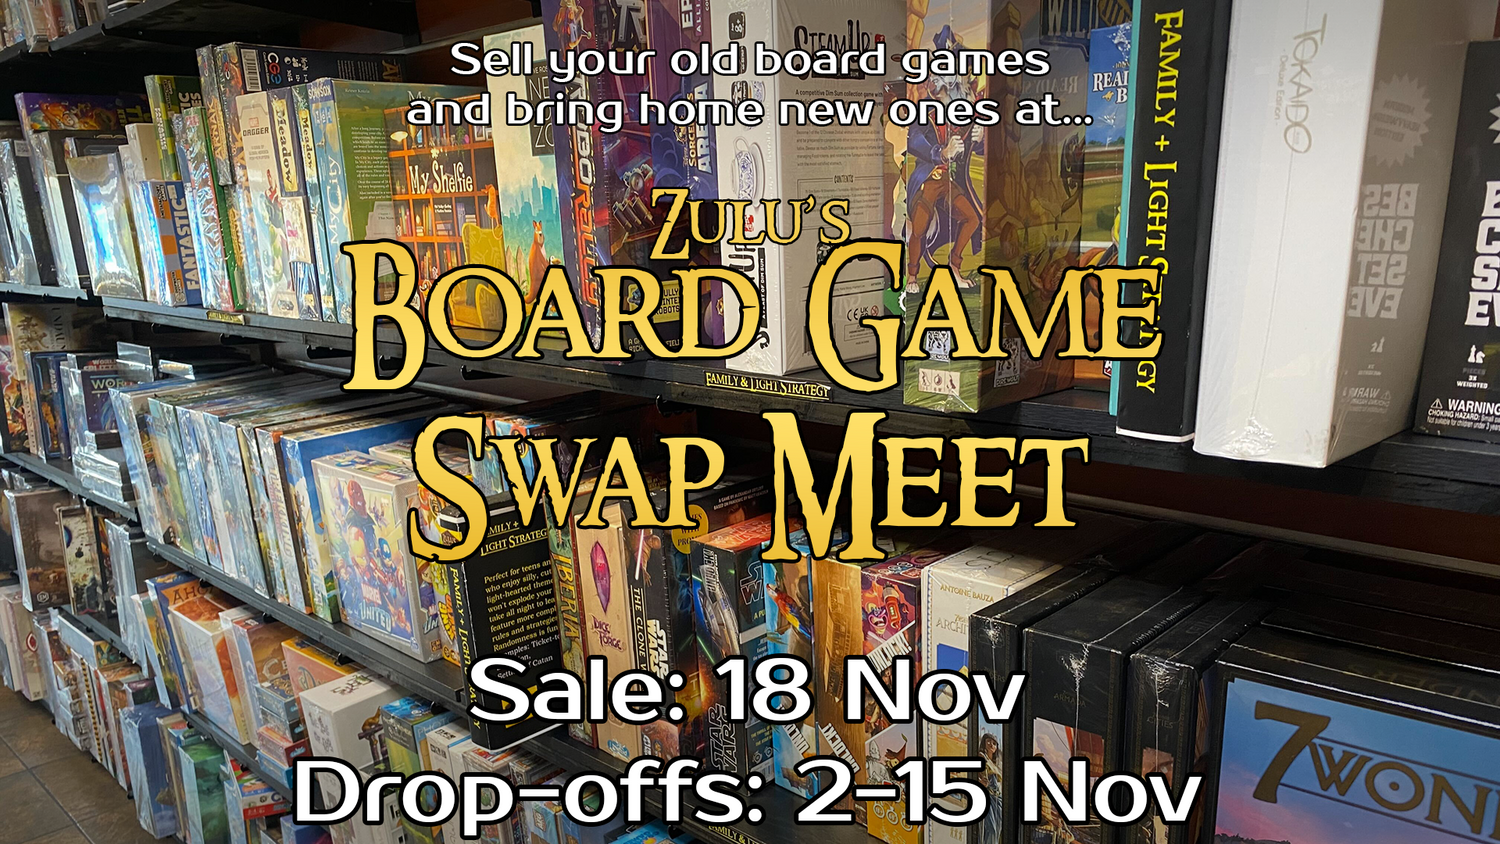 Sell your old board games and bring home new ones at Zulu's Board Game Swap Meet! Sale: 18 Nov, Drop-offs: 2-15 Nov